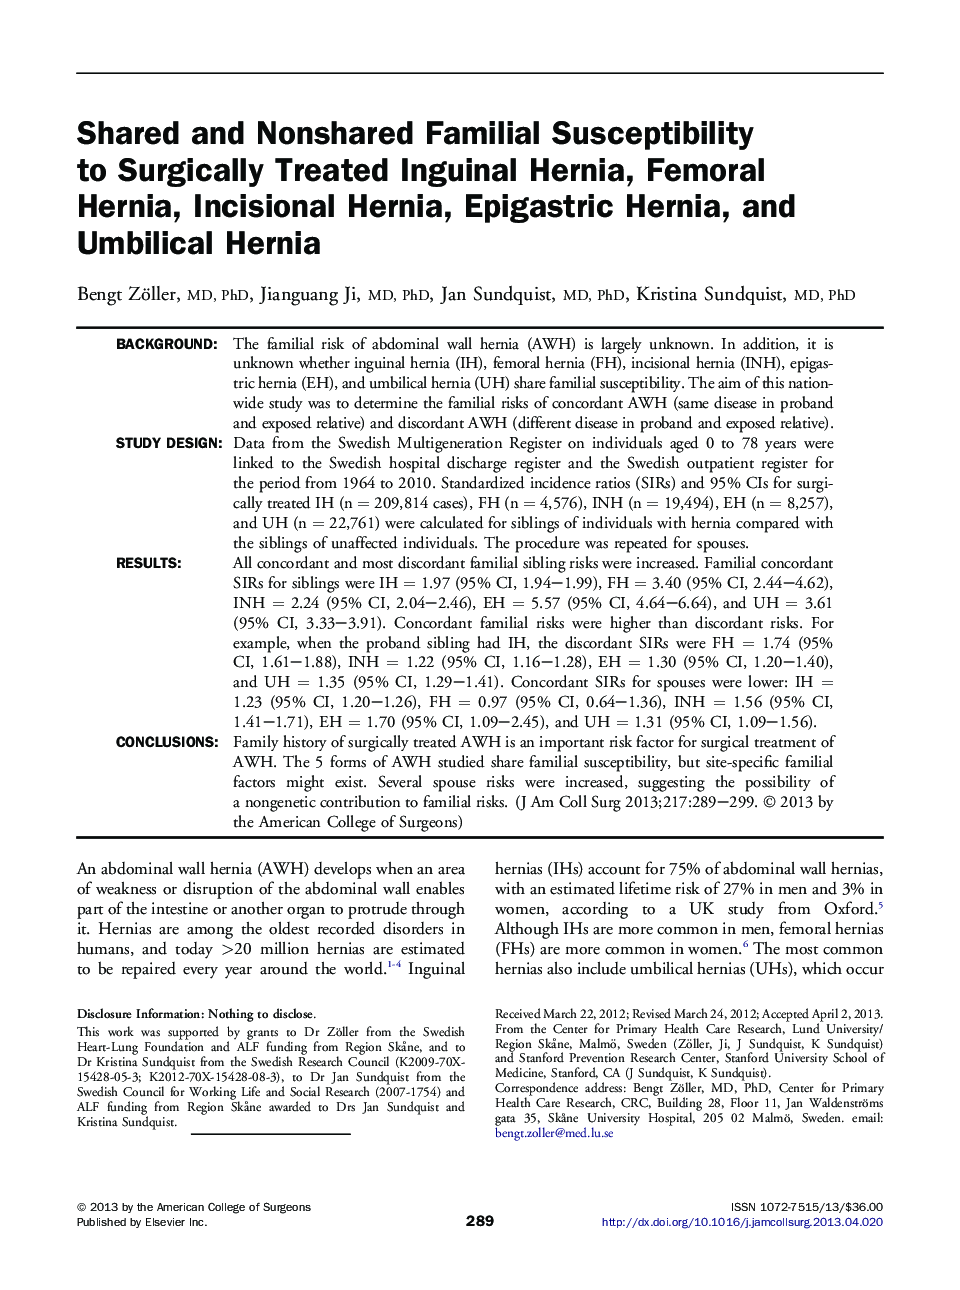 Shared and Nonshared Familial Susceptibility toÂ Surgically Treated Inguinal Hernia, Femoral Hernia,Â Incisional Hernia, Epigastric Hernia, and Umbilical Hernia